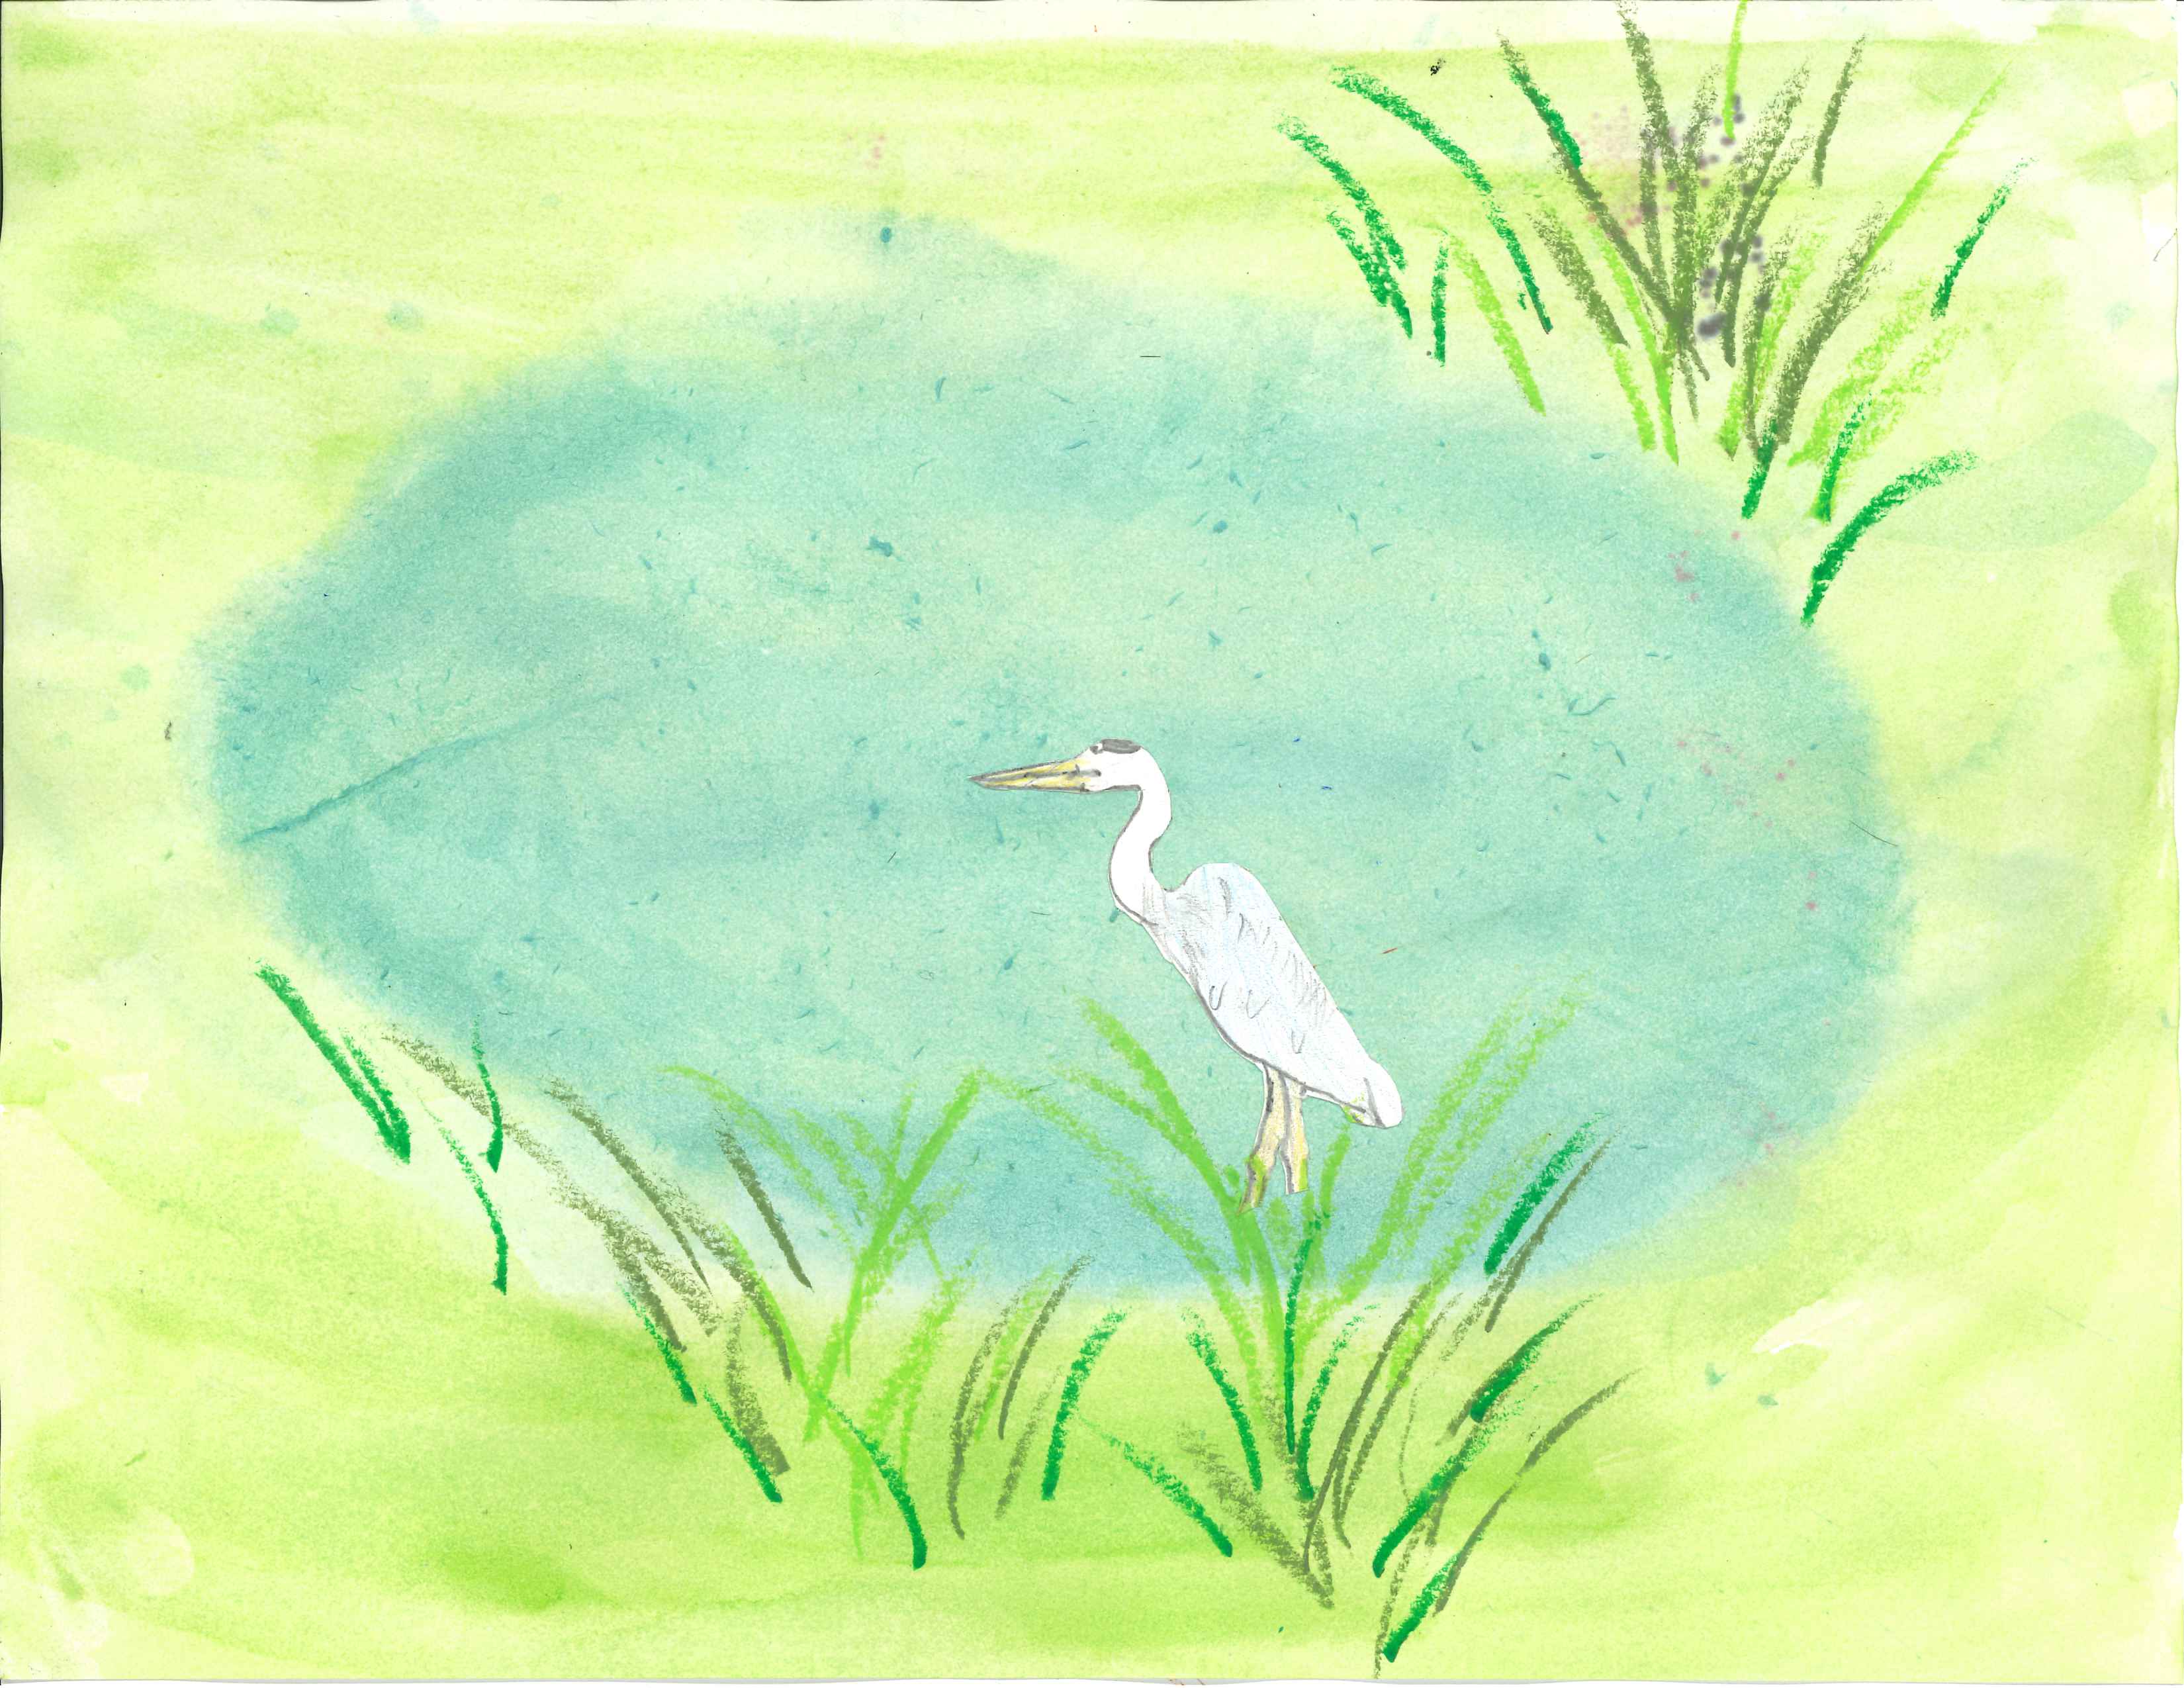 Nick Chronley - 3rd Grade - 2nd Place, Heron in Pond